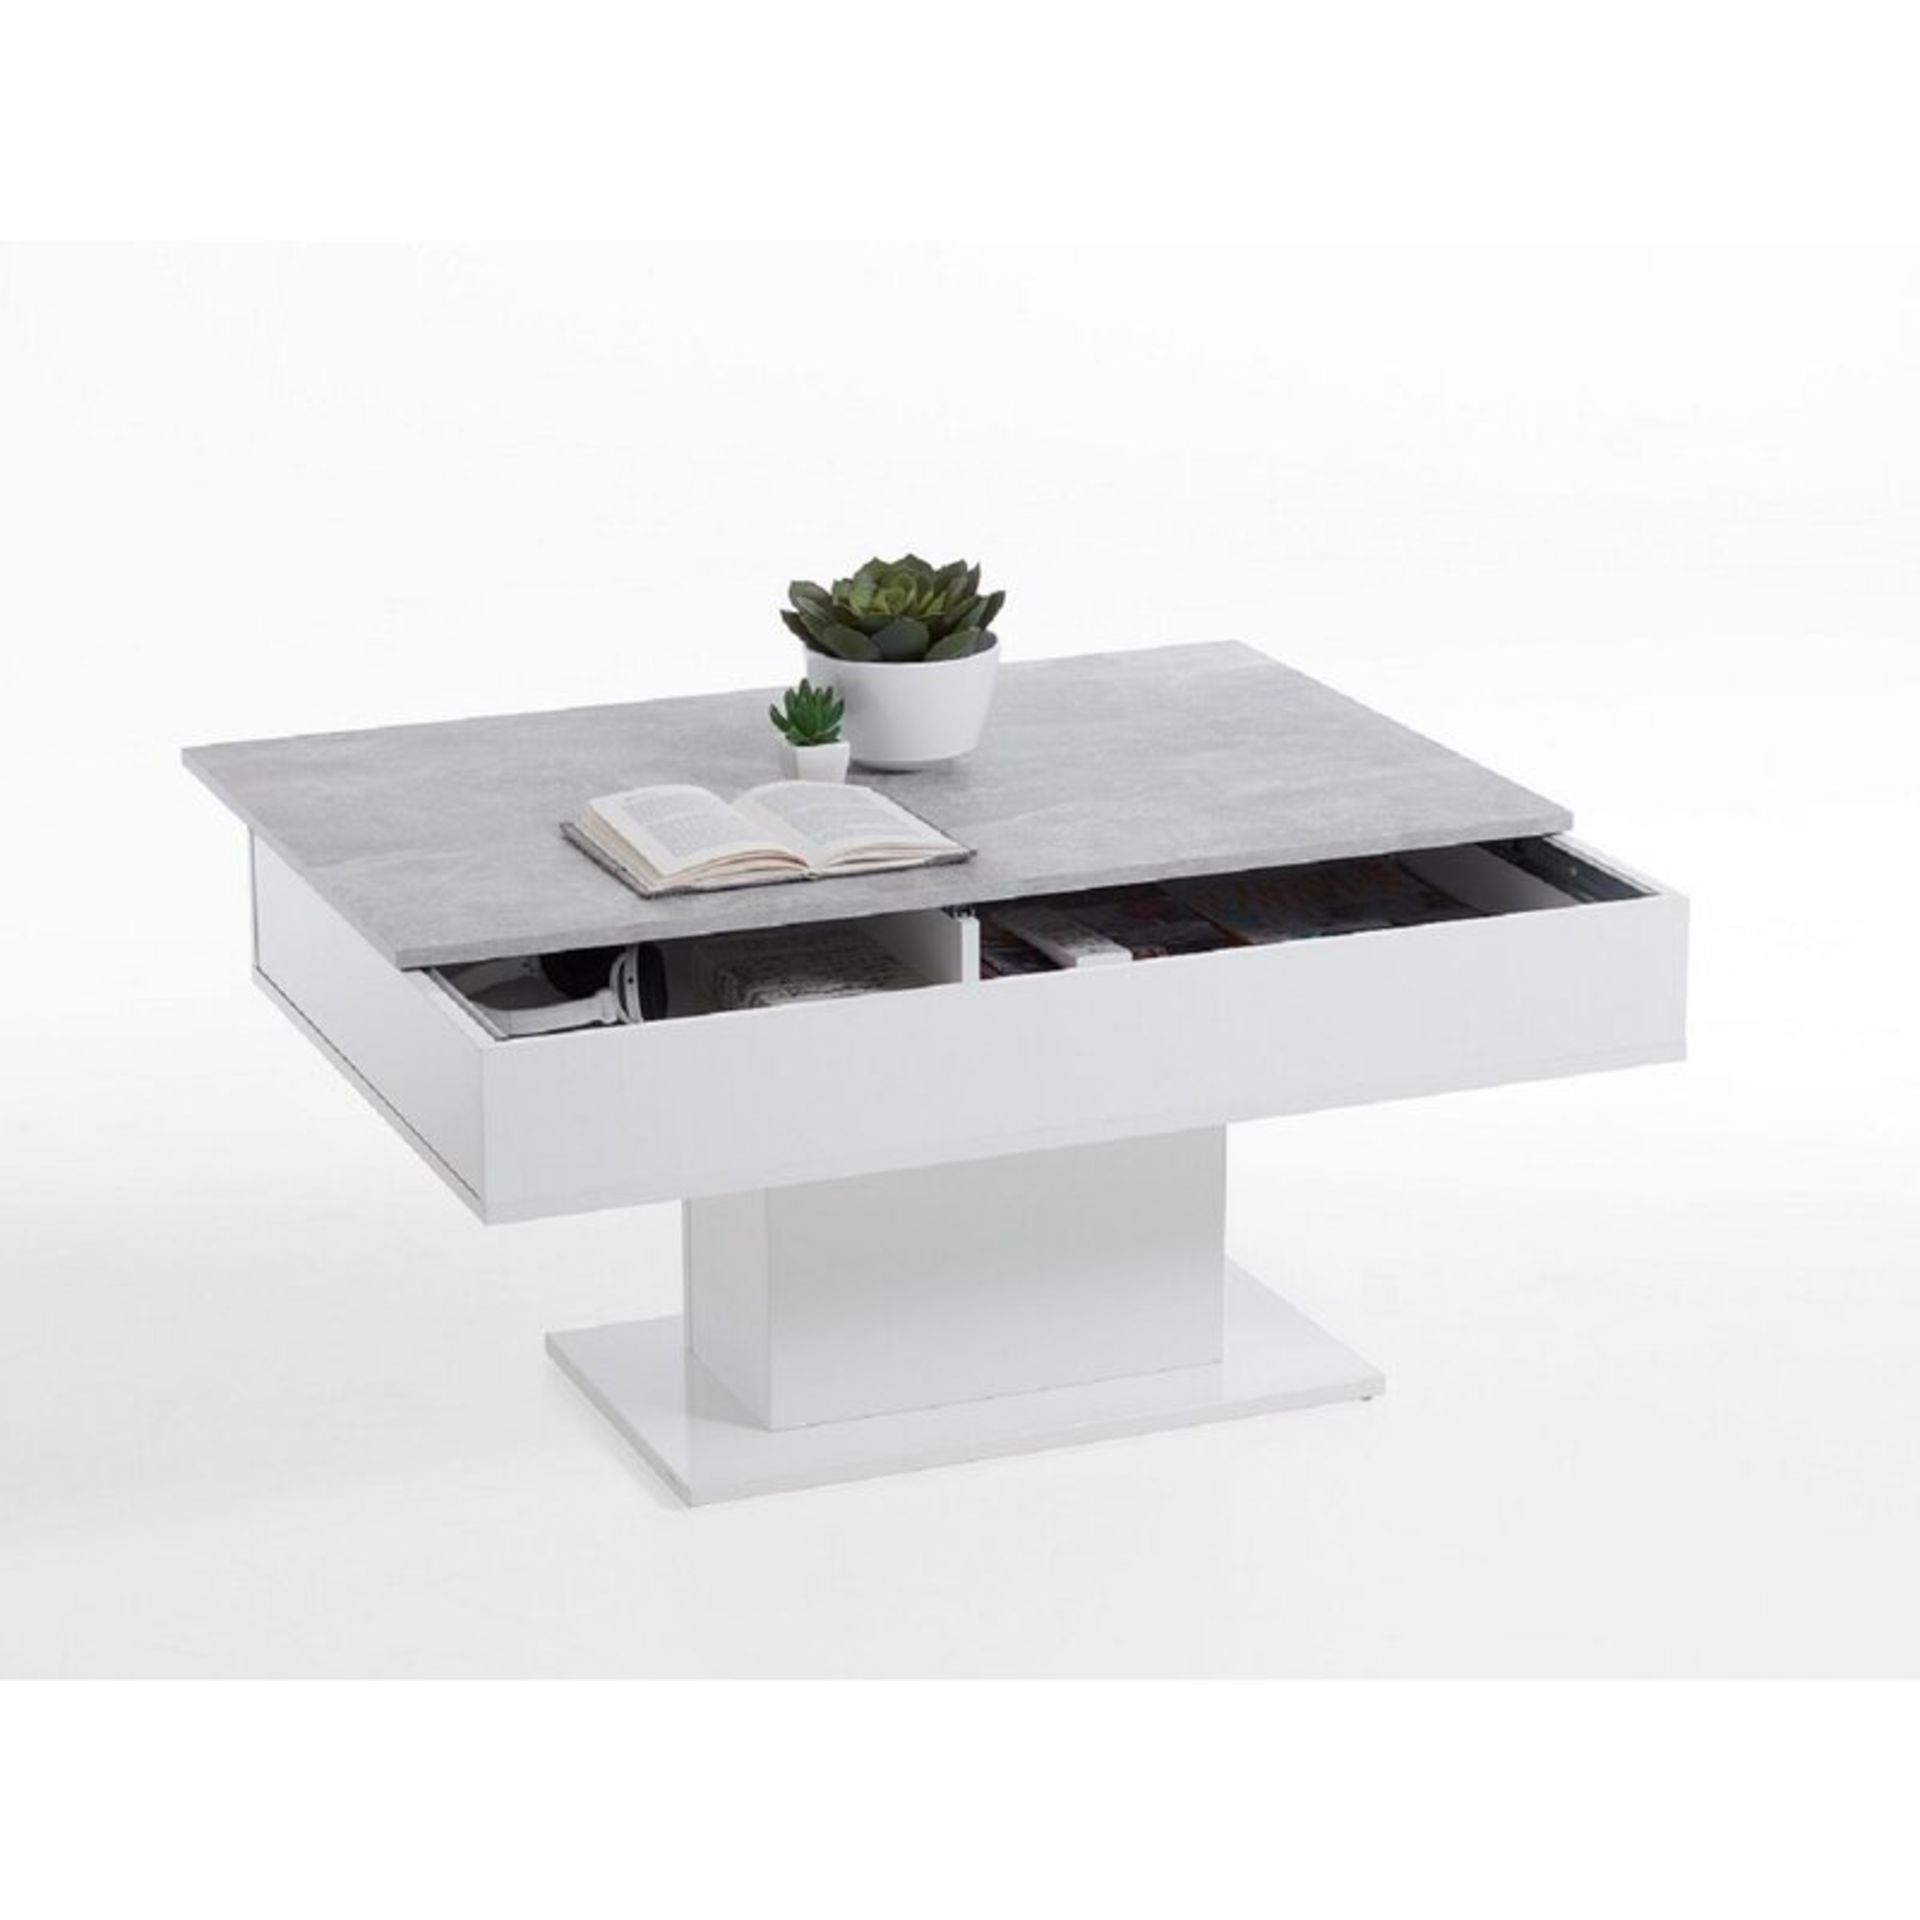 Pedestal Coffee Table with Storage - RRP £207.99. - Image 3 of 3